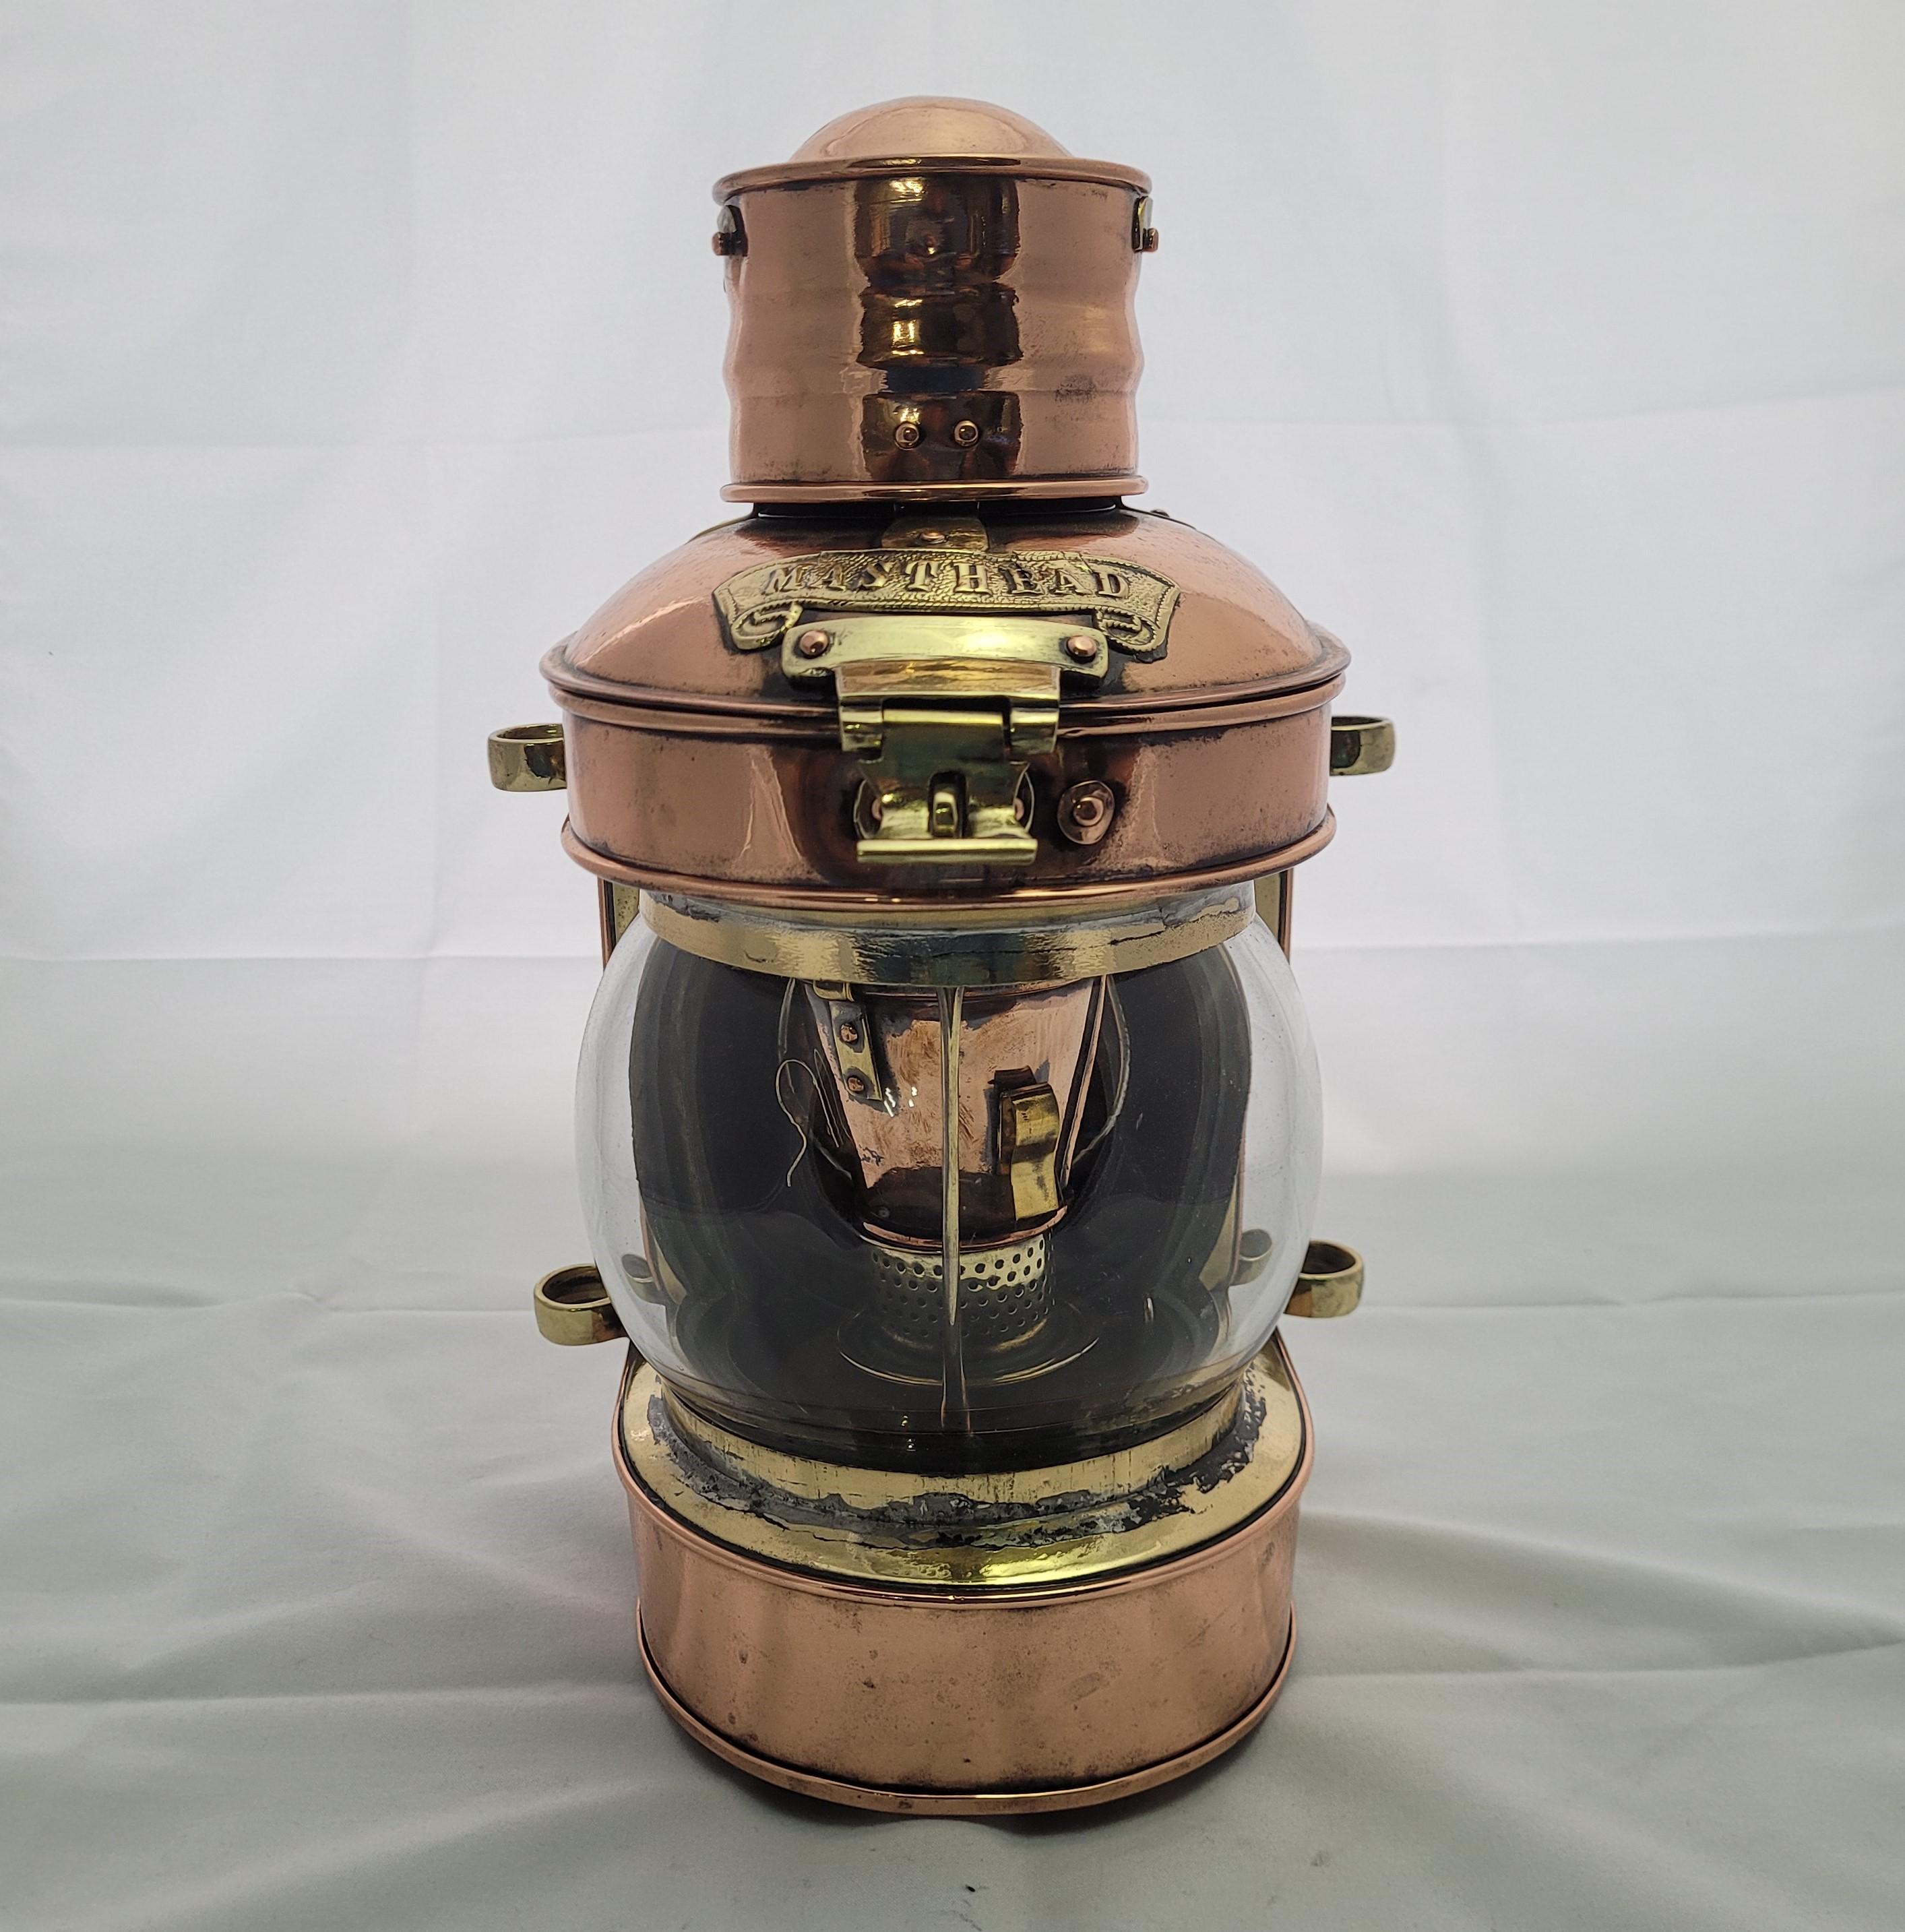 Antique highly polished copper and brass ships masthead lantern. There is a clear globe shaped lens, hinged top, the interior has an awesome burner with reflector. English, Circa 1925. As good as they come.

Weight: 4 lbs. Each
Overall